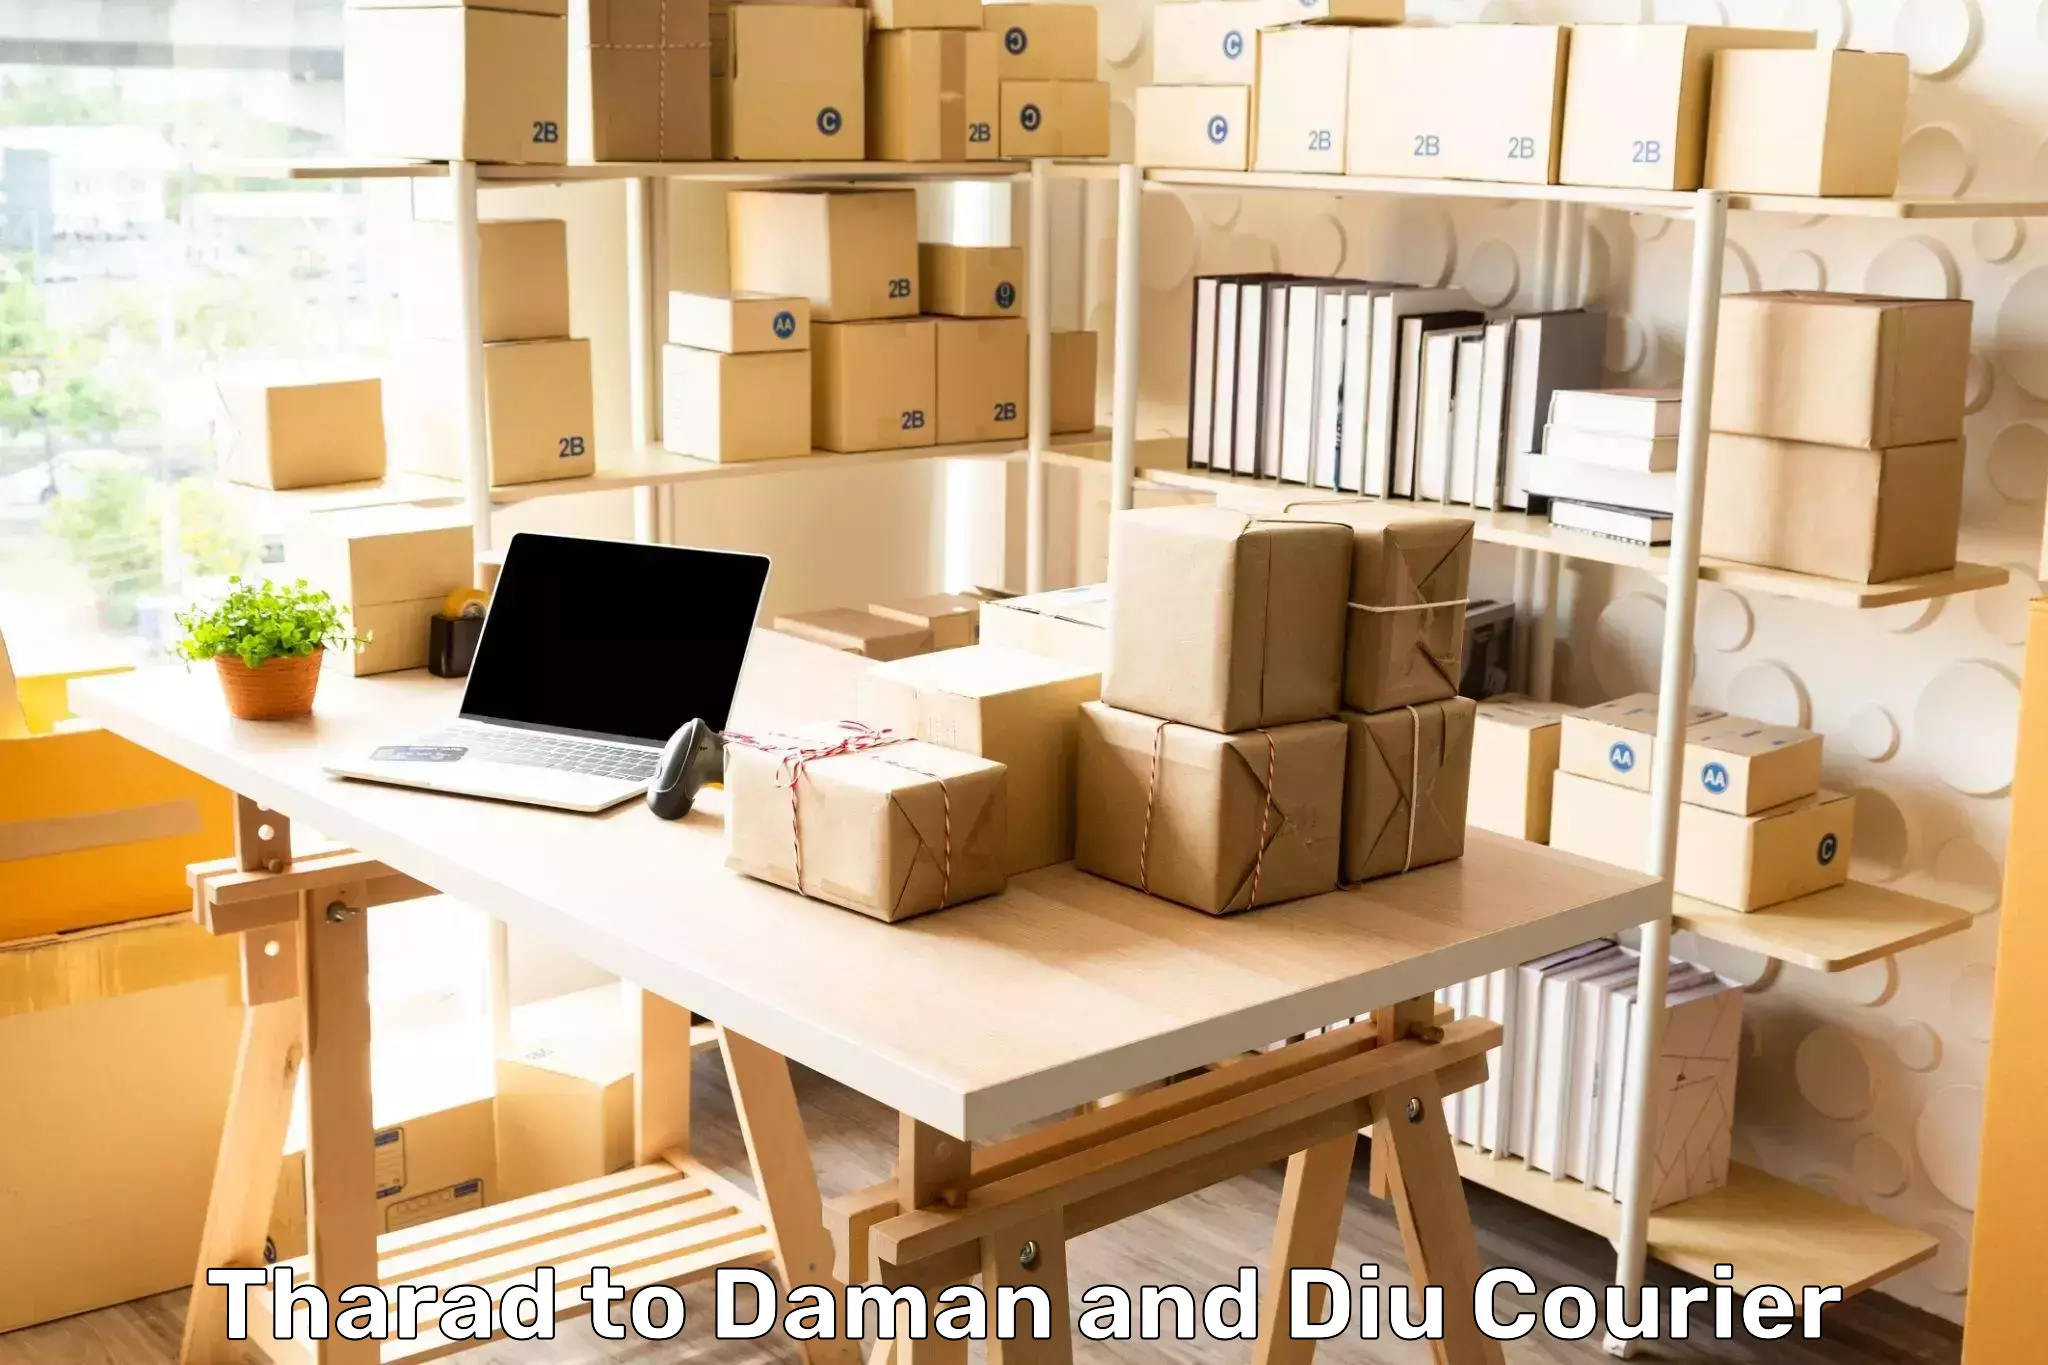 Multi-service courier options in Tharad to Daman and Diu